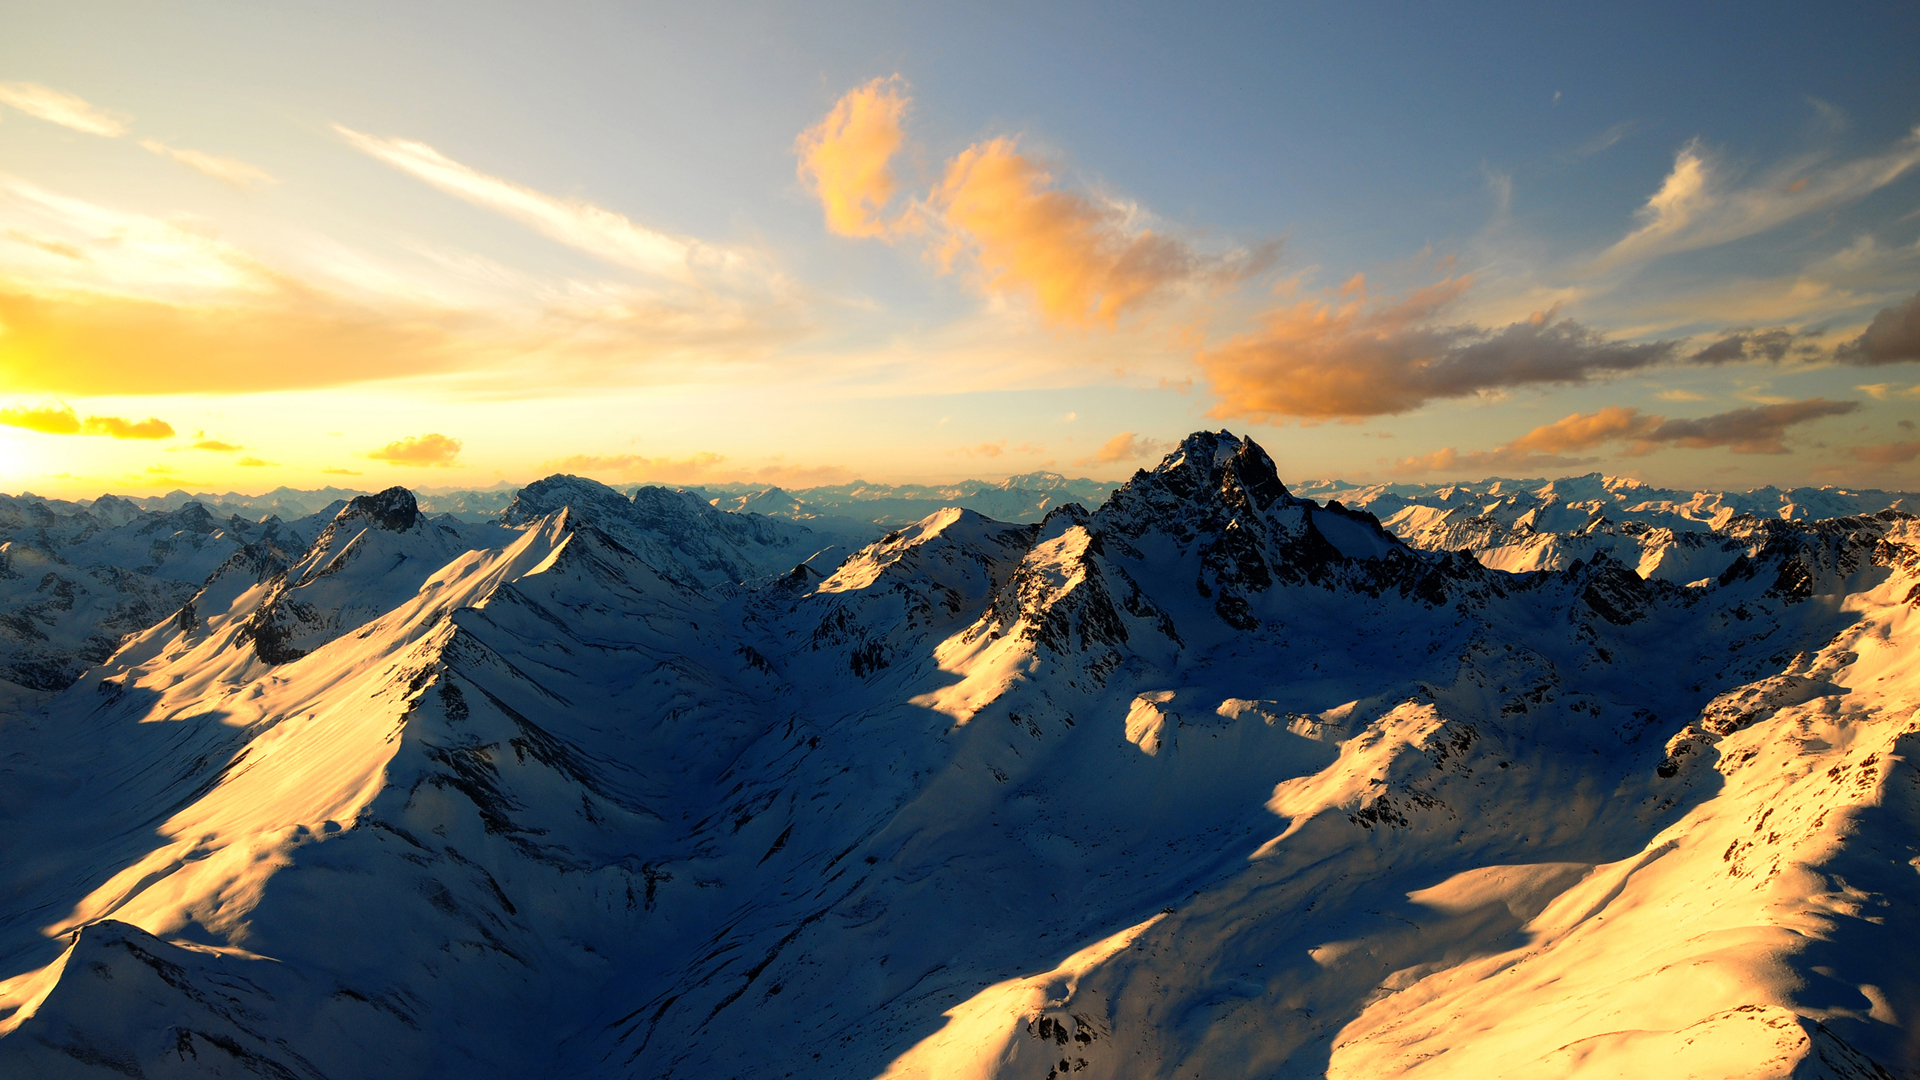 HD Quality Snow Mountains Scenery Wallpaper - LuvWallpaper 249